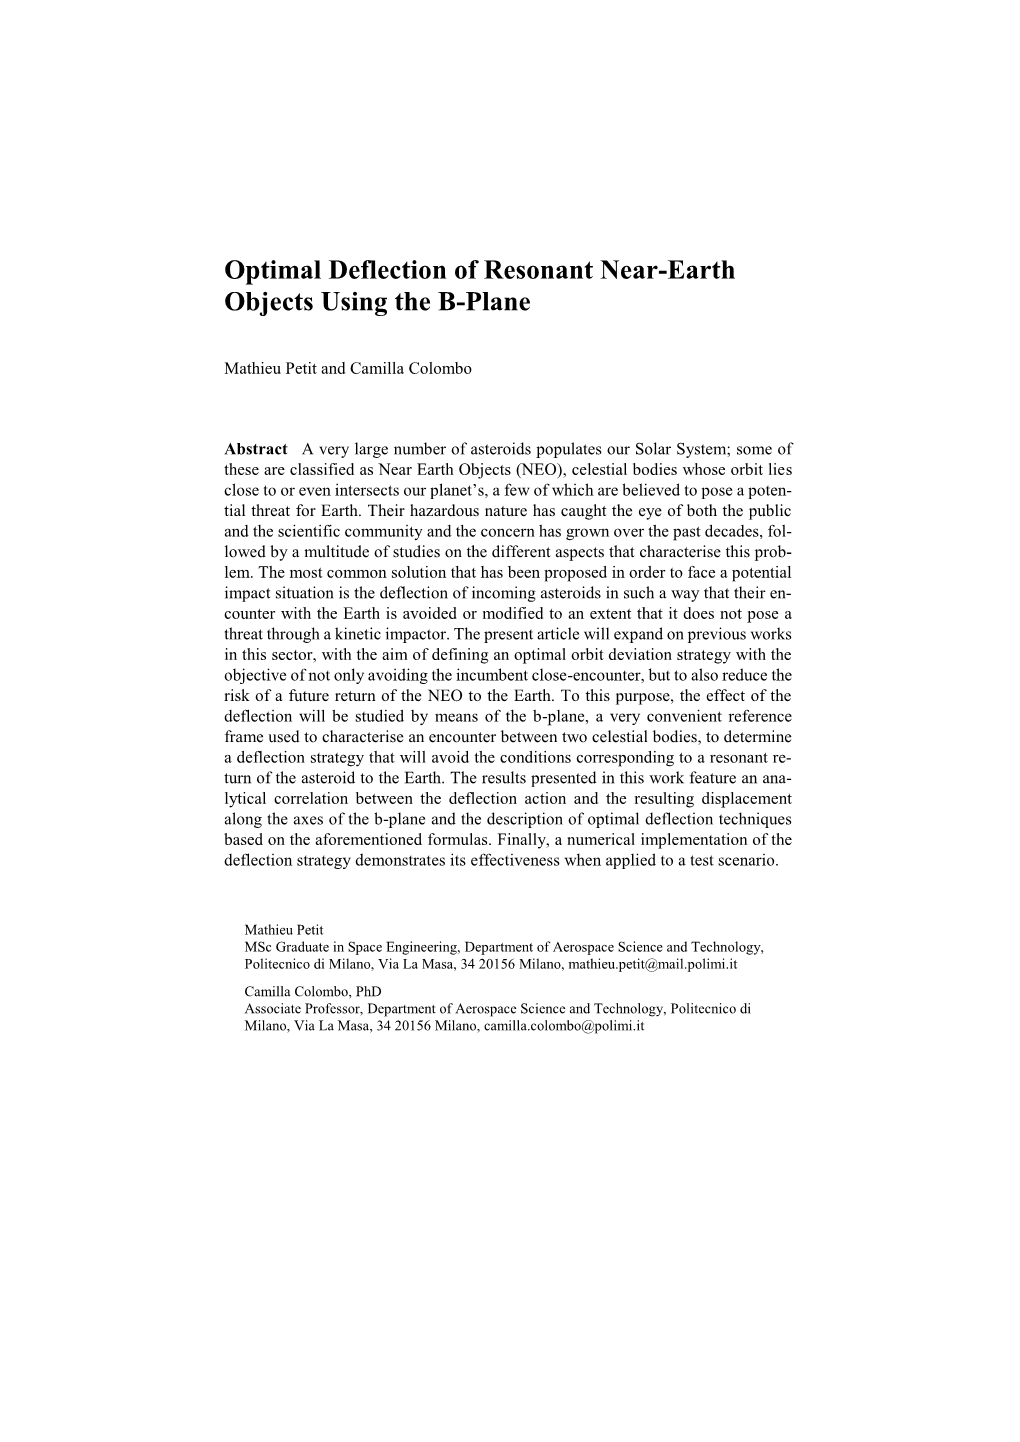 Optimal Deflection of Resonant Near-Earth Objects Using the B-Plane